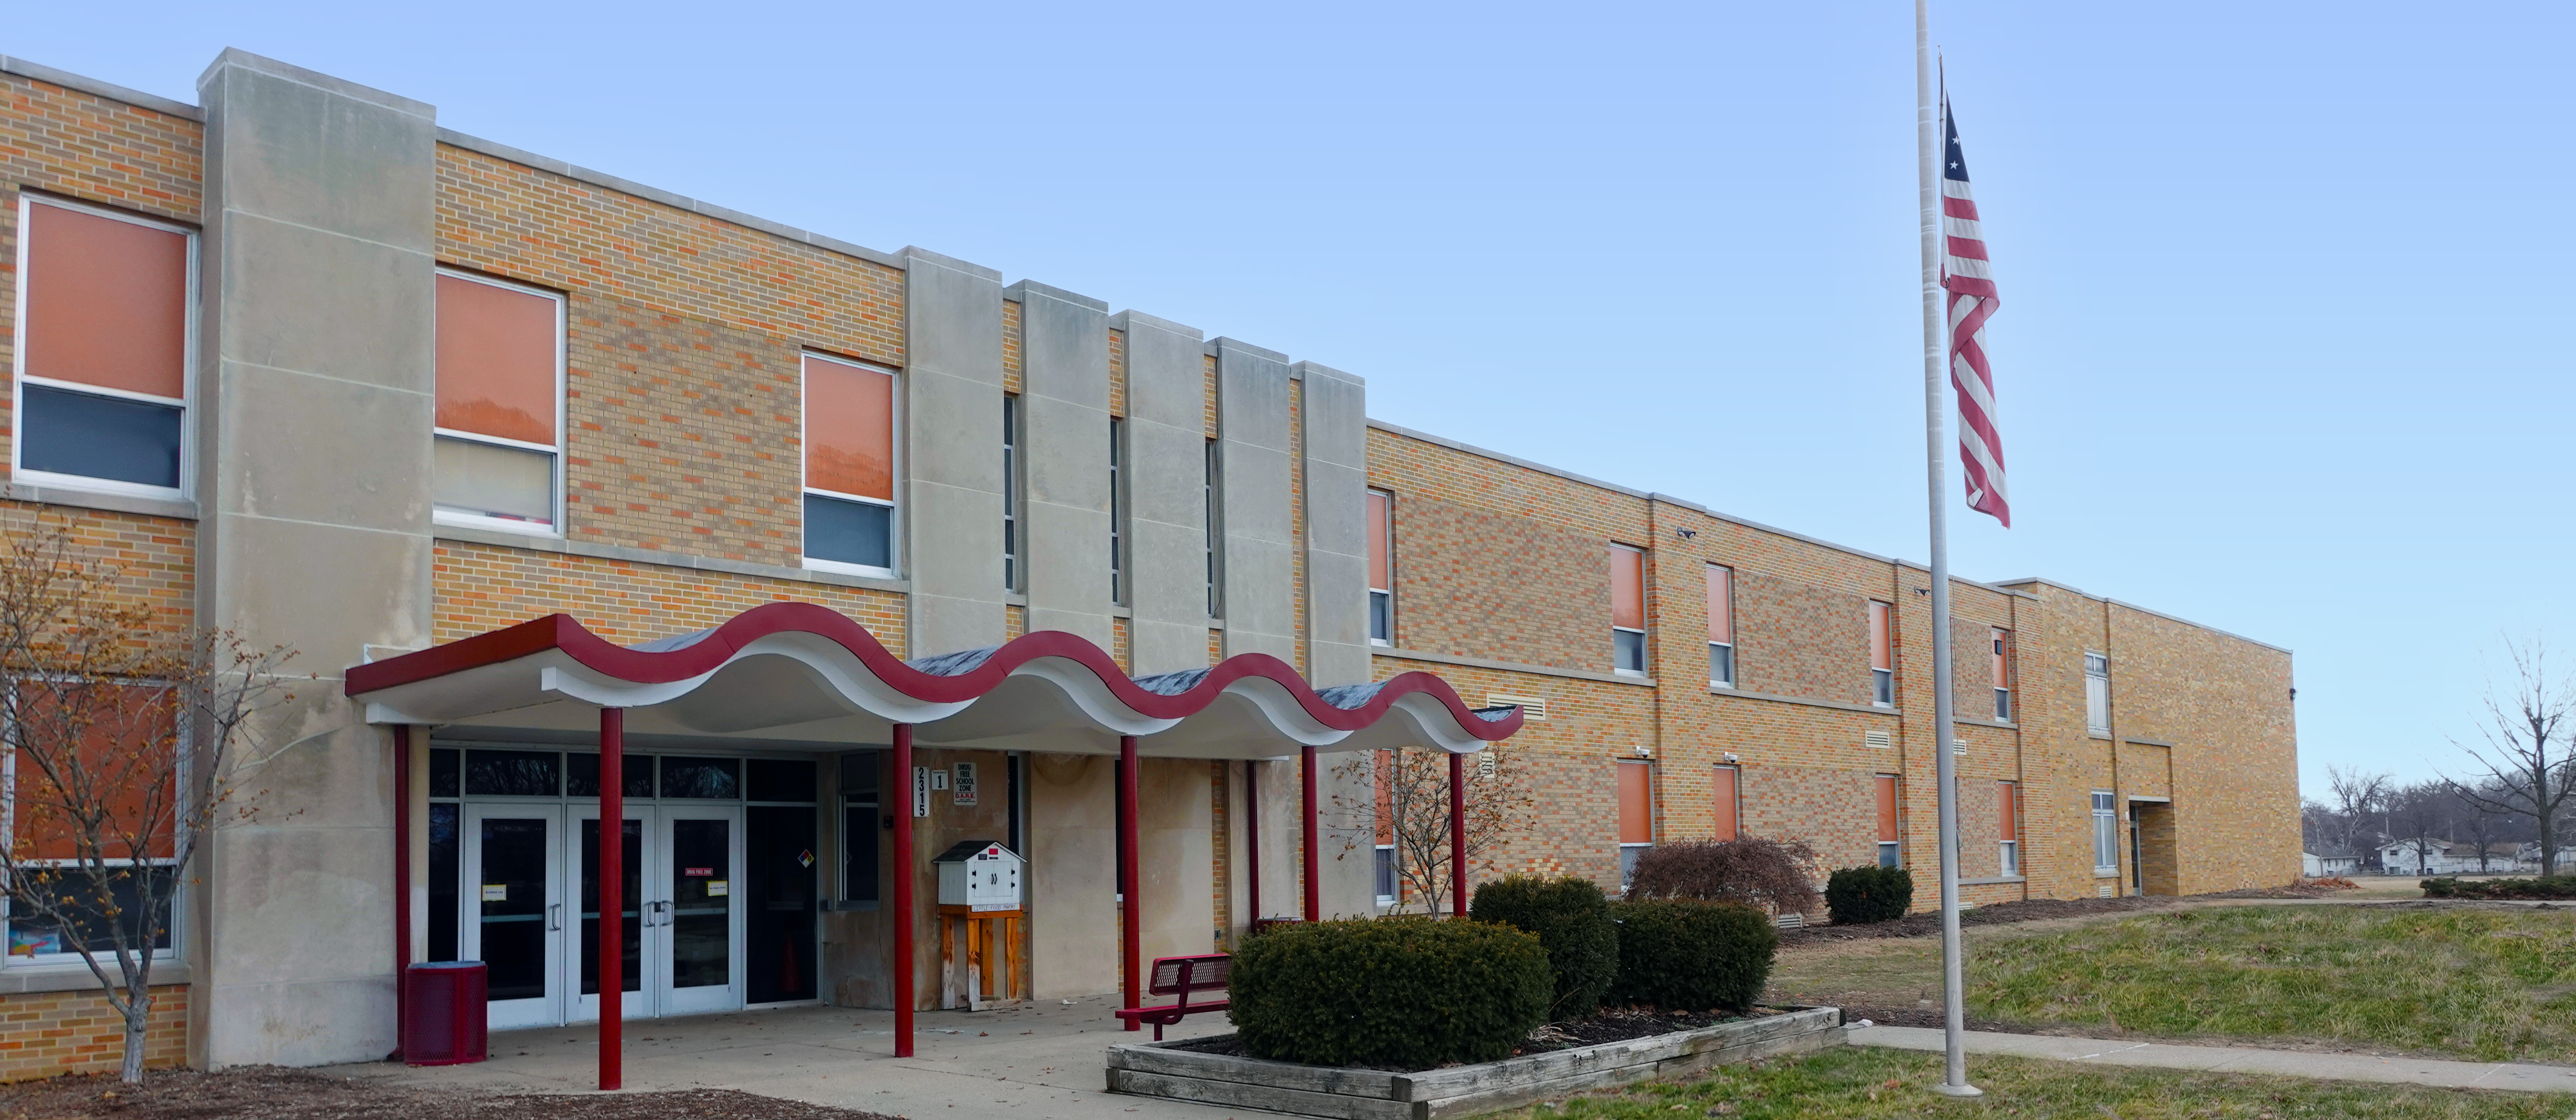 front of sterling school building